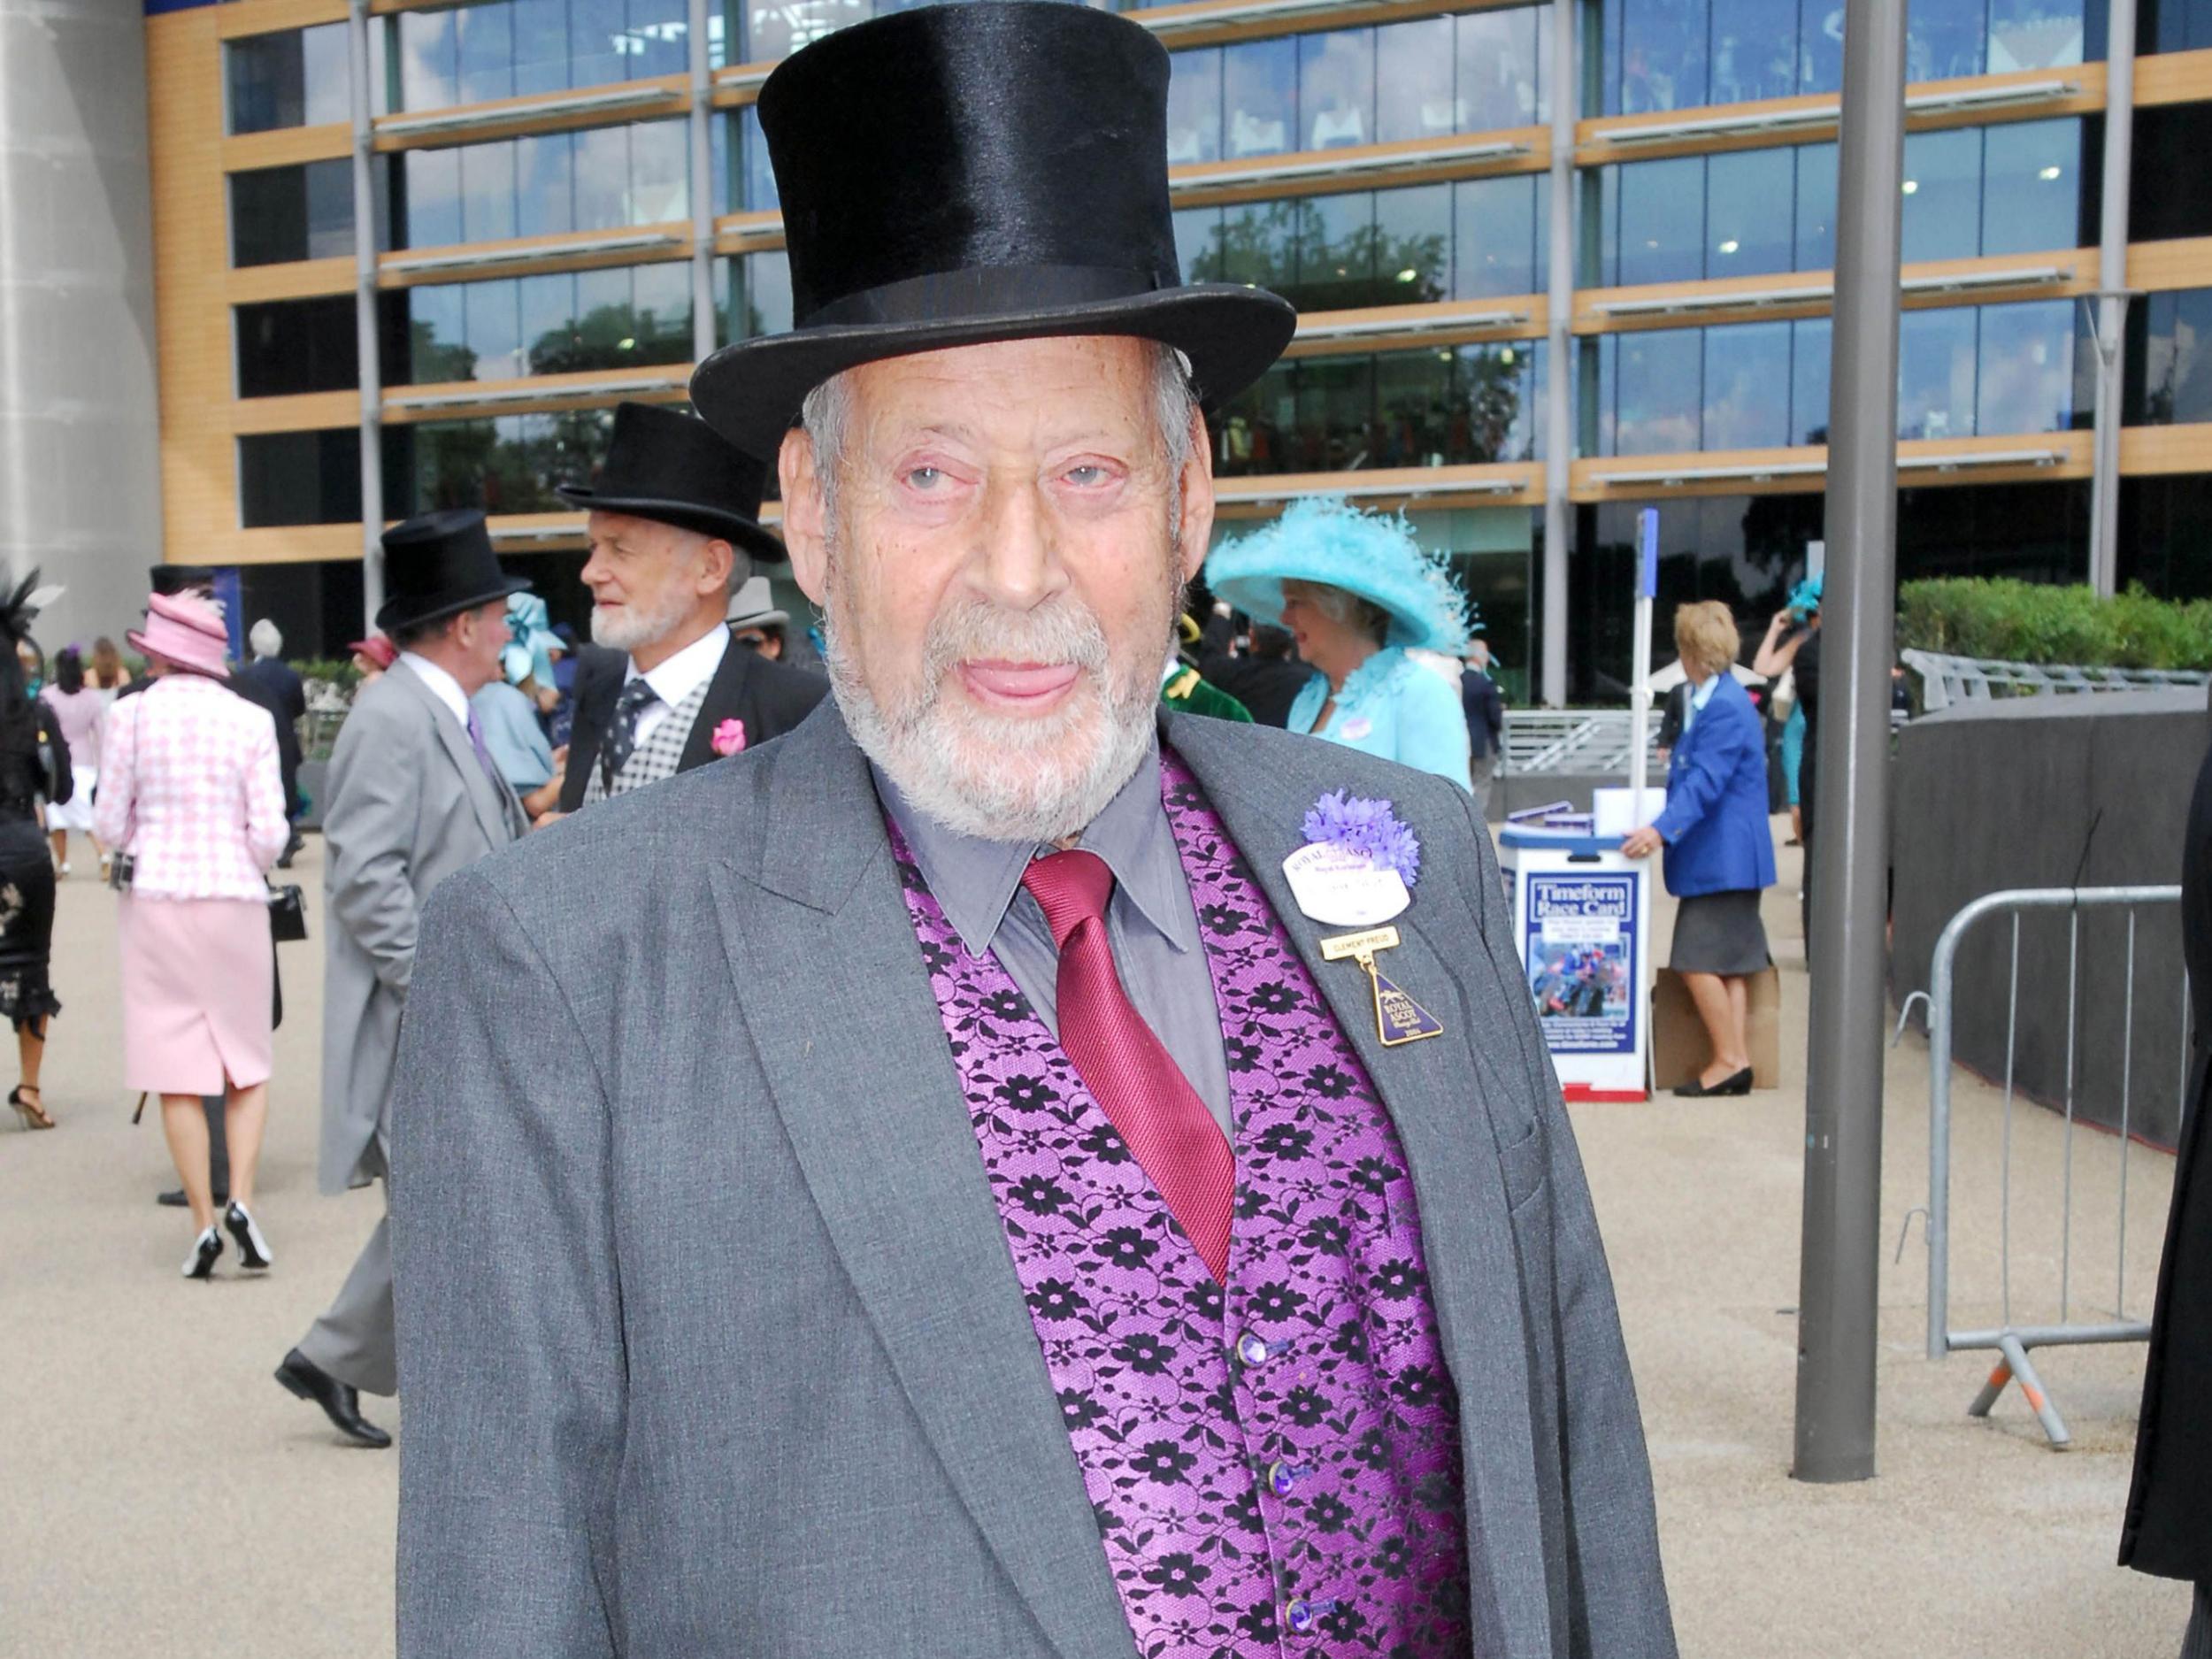 Clement Freud was knighted in 1987